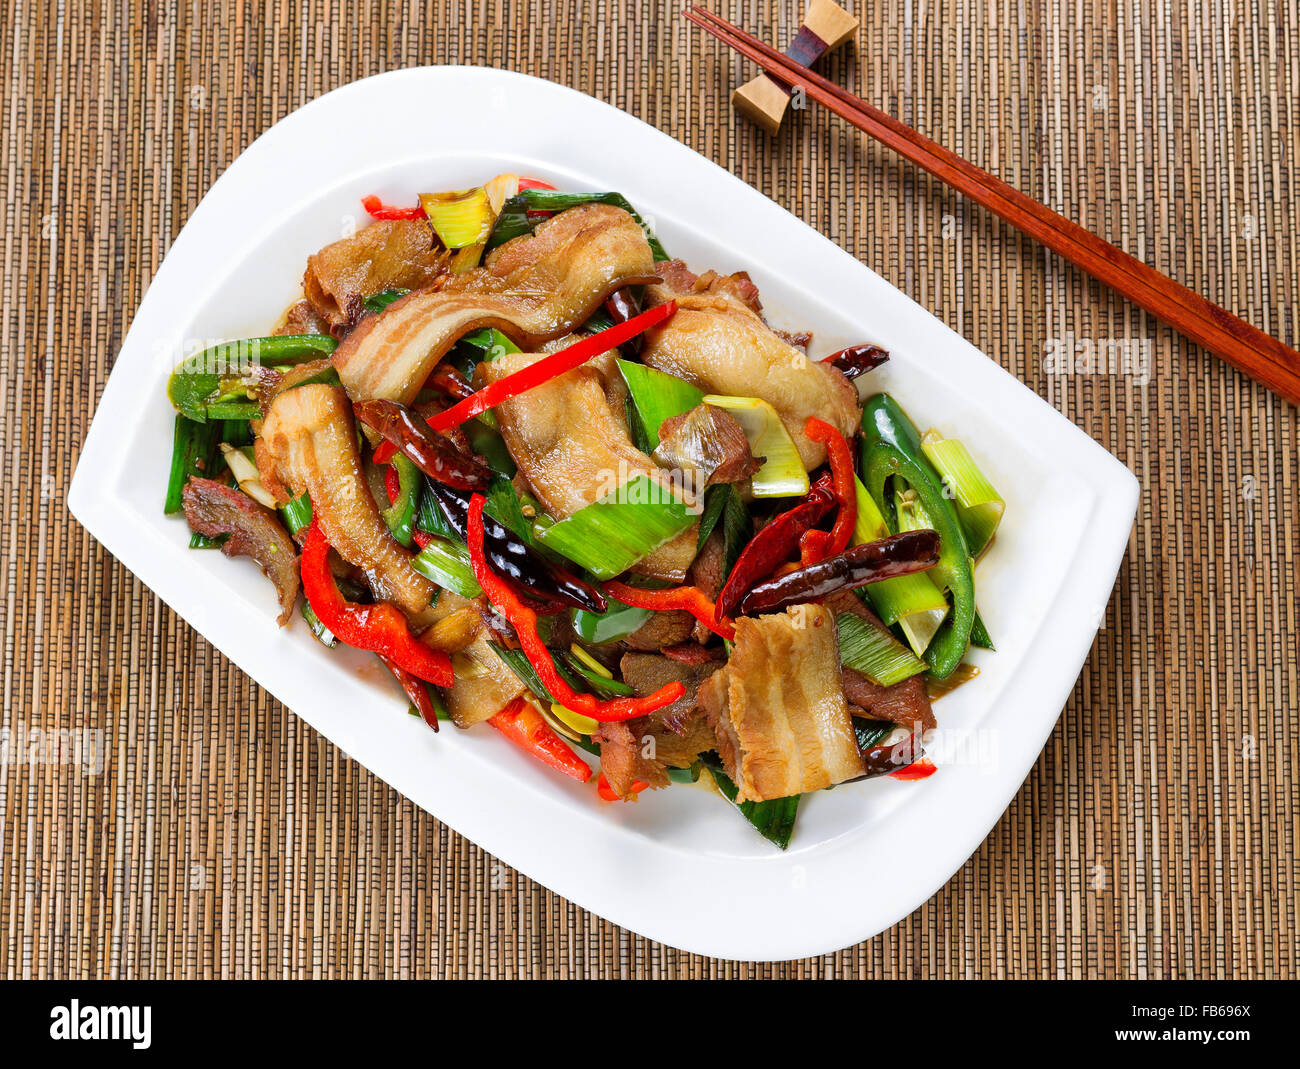 Top view of bacon, beef, peppers and onion in white plate with bamboo mat underneath. Stock Photo